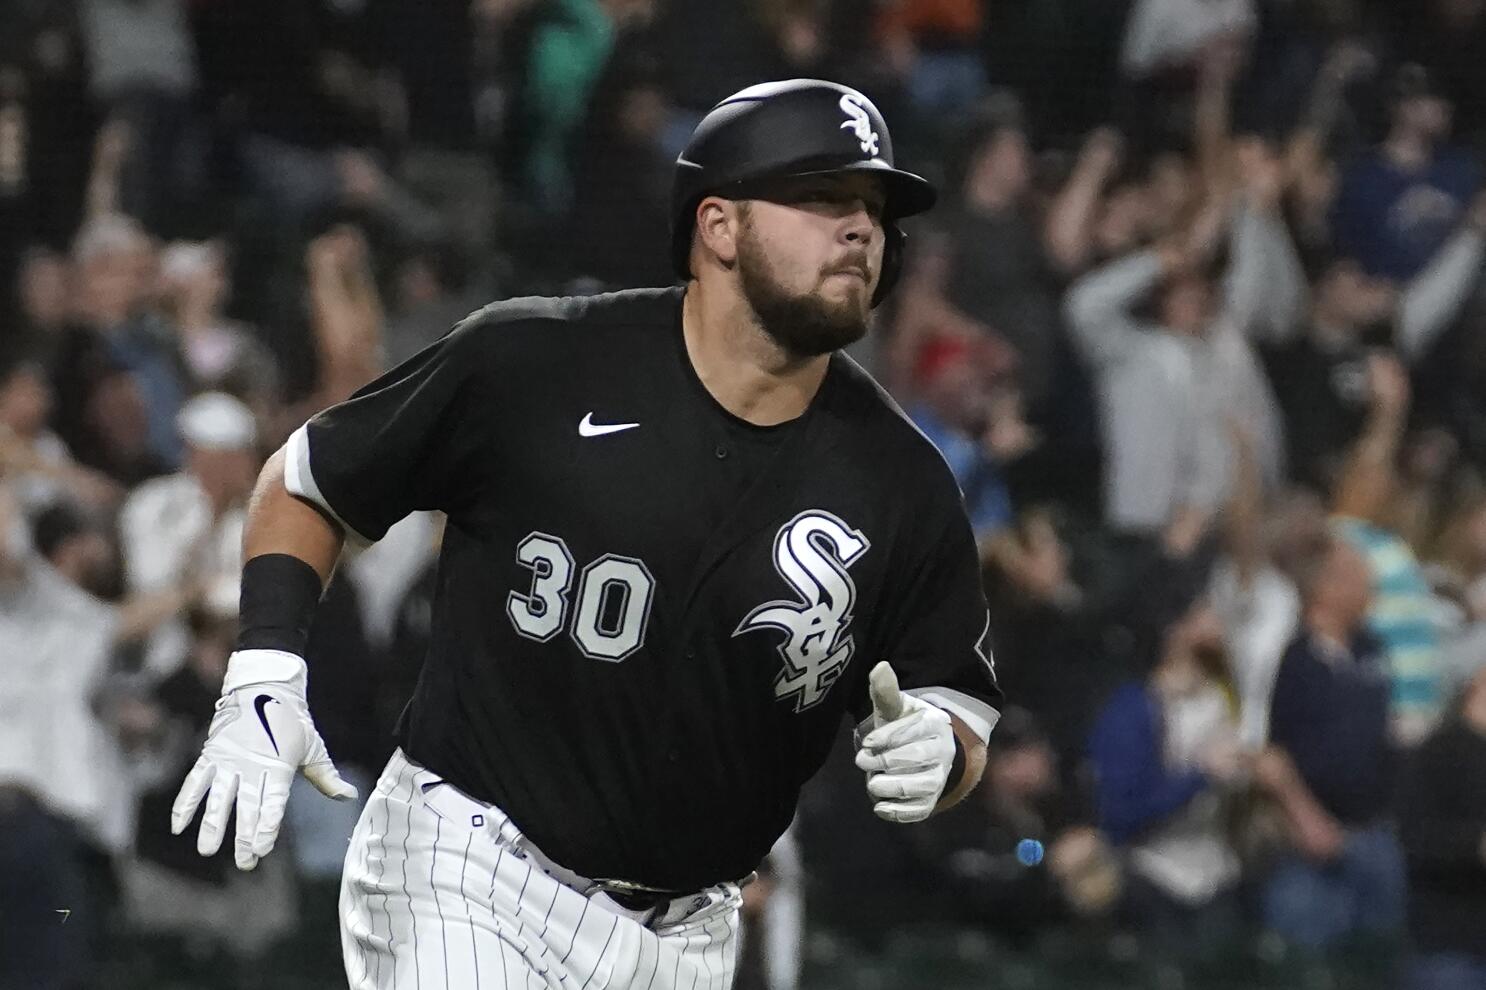 White Sox pitcher Lucas Giolito splits from wife files during All